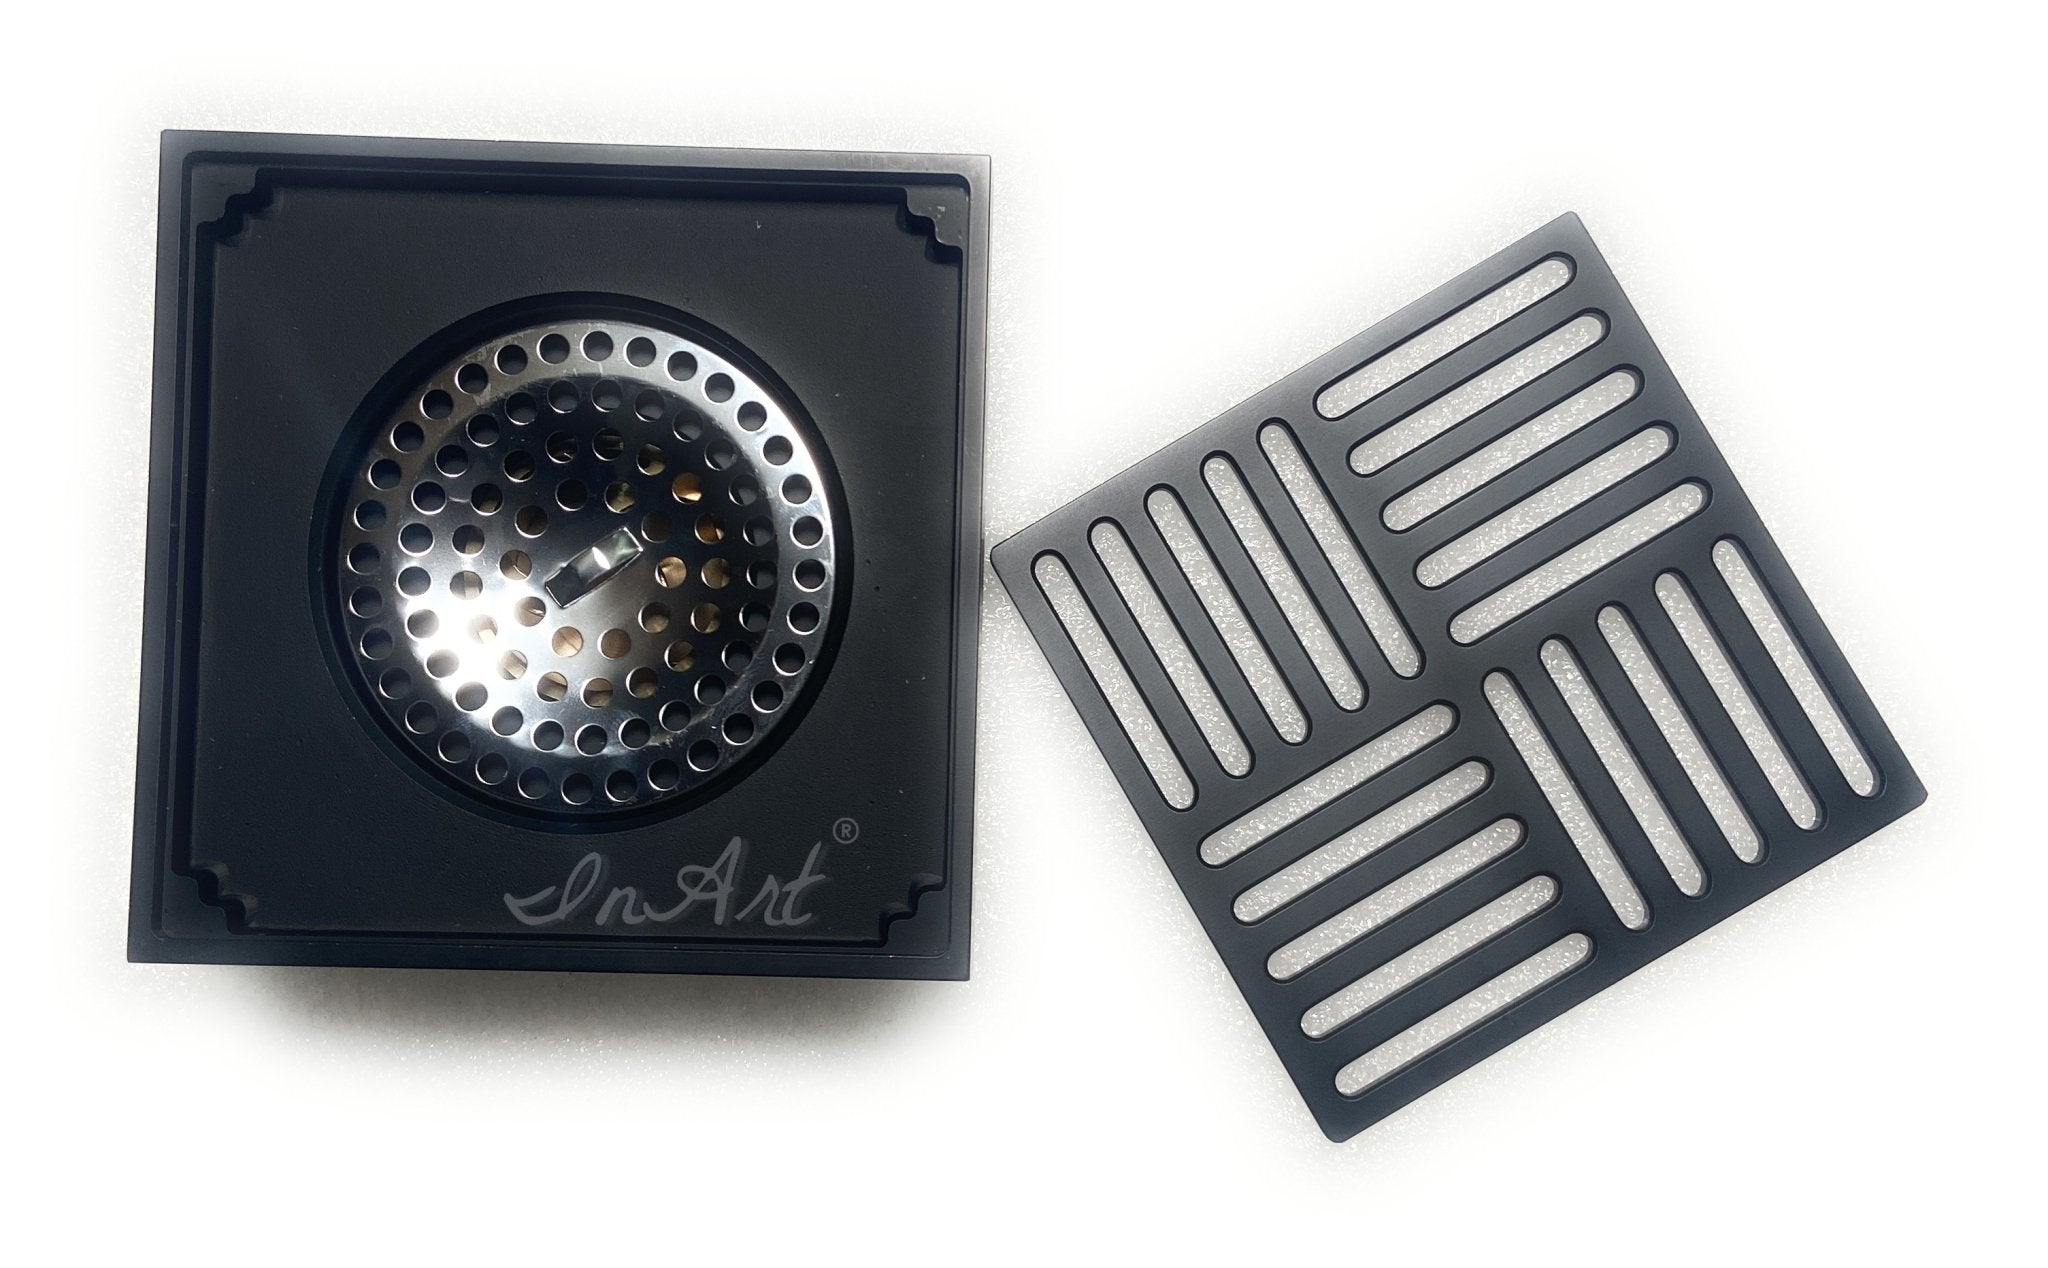 InArt Brass Square Shower Floor Drain with Removable Cover Grid Grate 5 inch Long Black Matt Color Stripes Pattern - InArt-Studio-USA